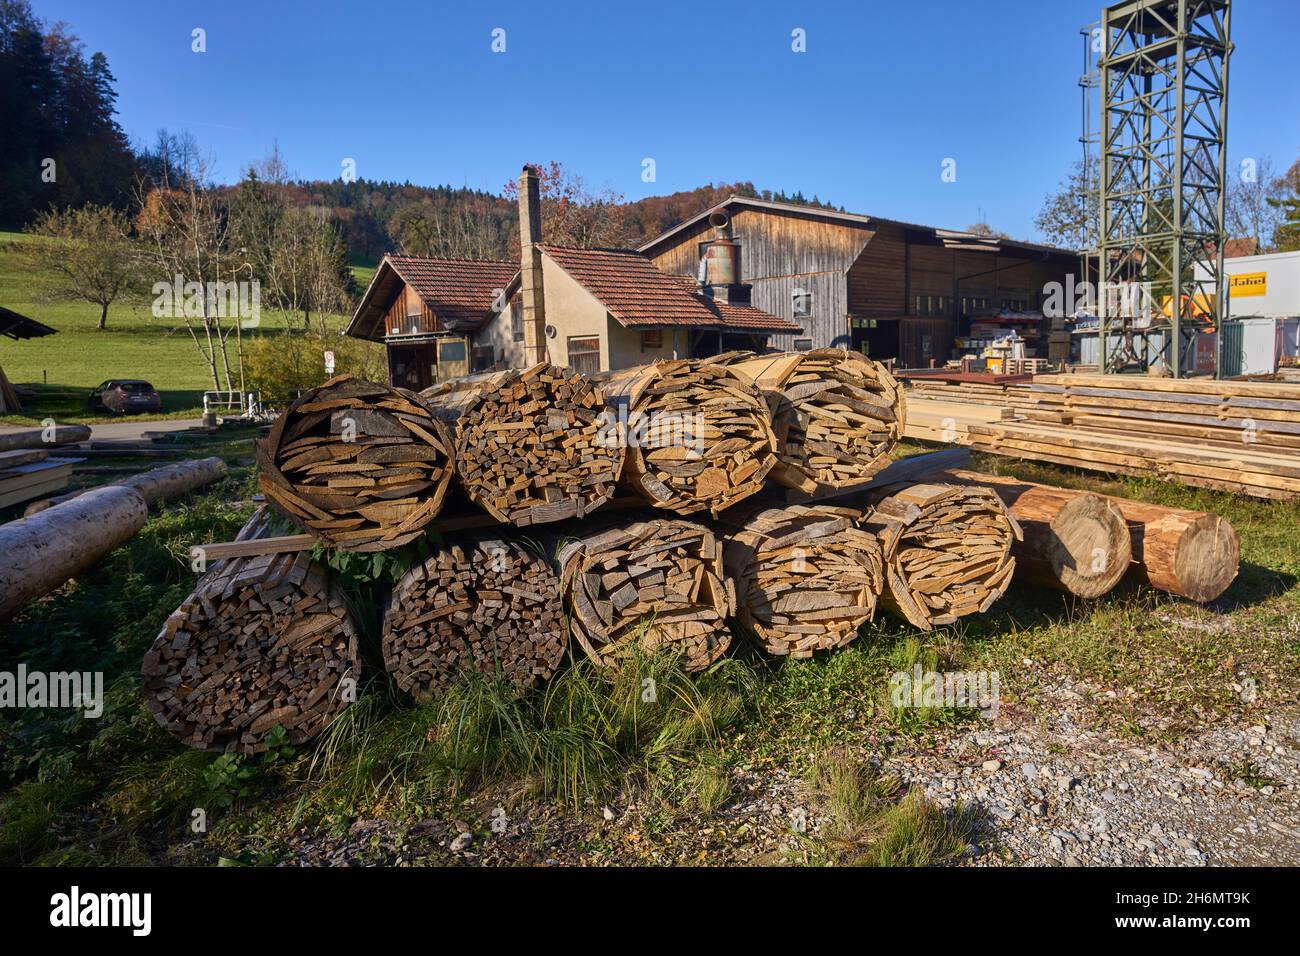 Outdoor Lumber Yard, In The Background Sawmill Building, Meadow And Blue Sky. Gündisau, Zurich Oberland, Switzerland Stock Photo